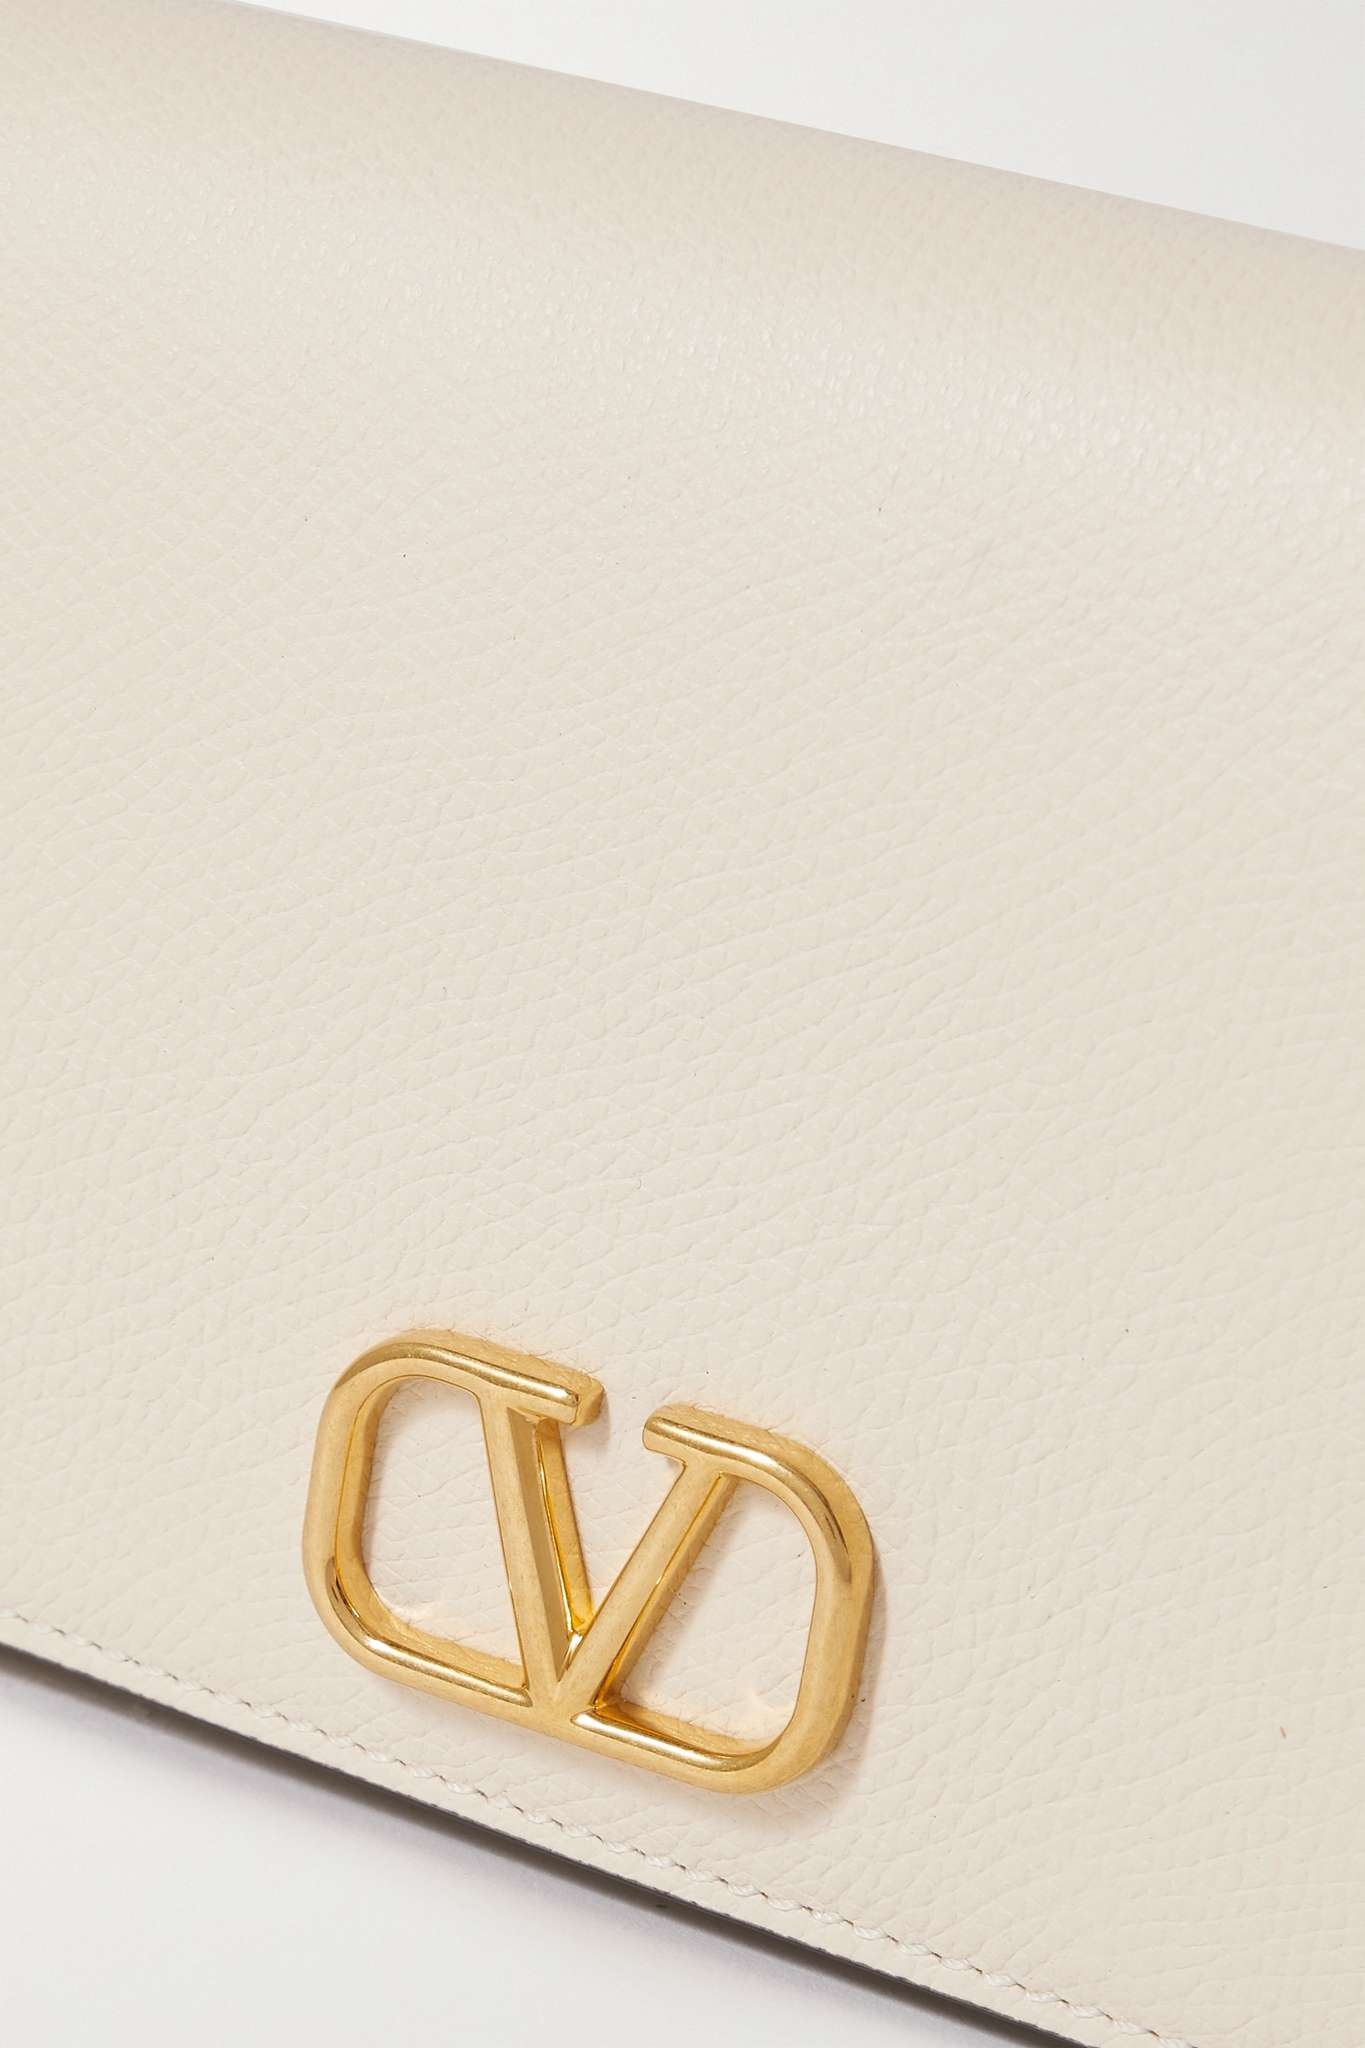 VLOGO textured-leather clutch - 4